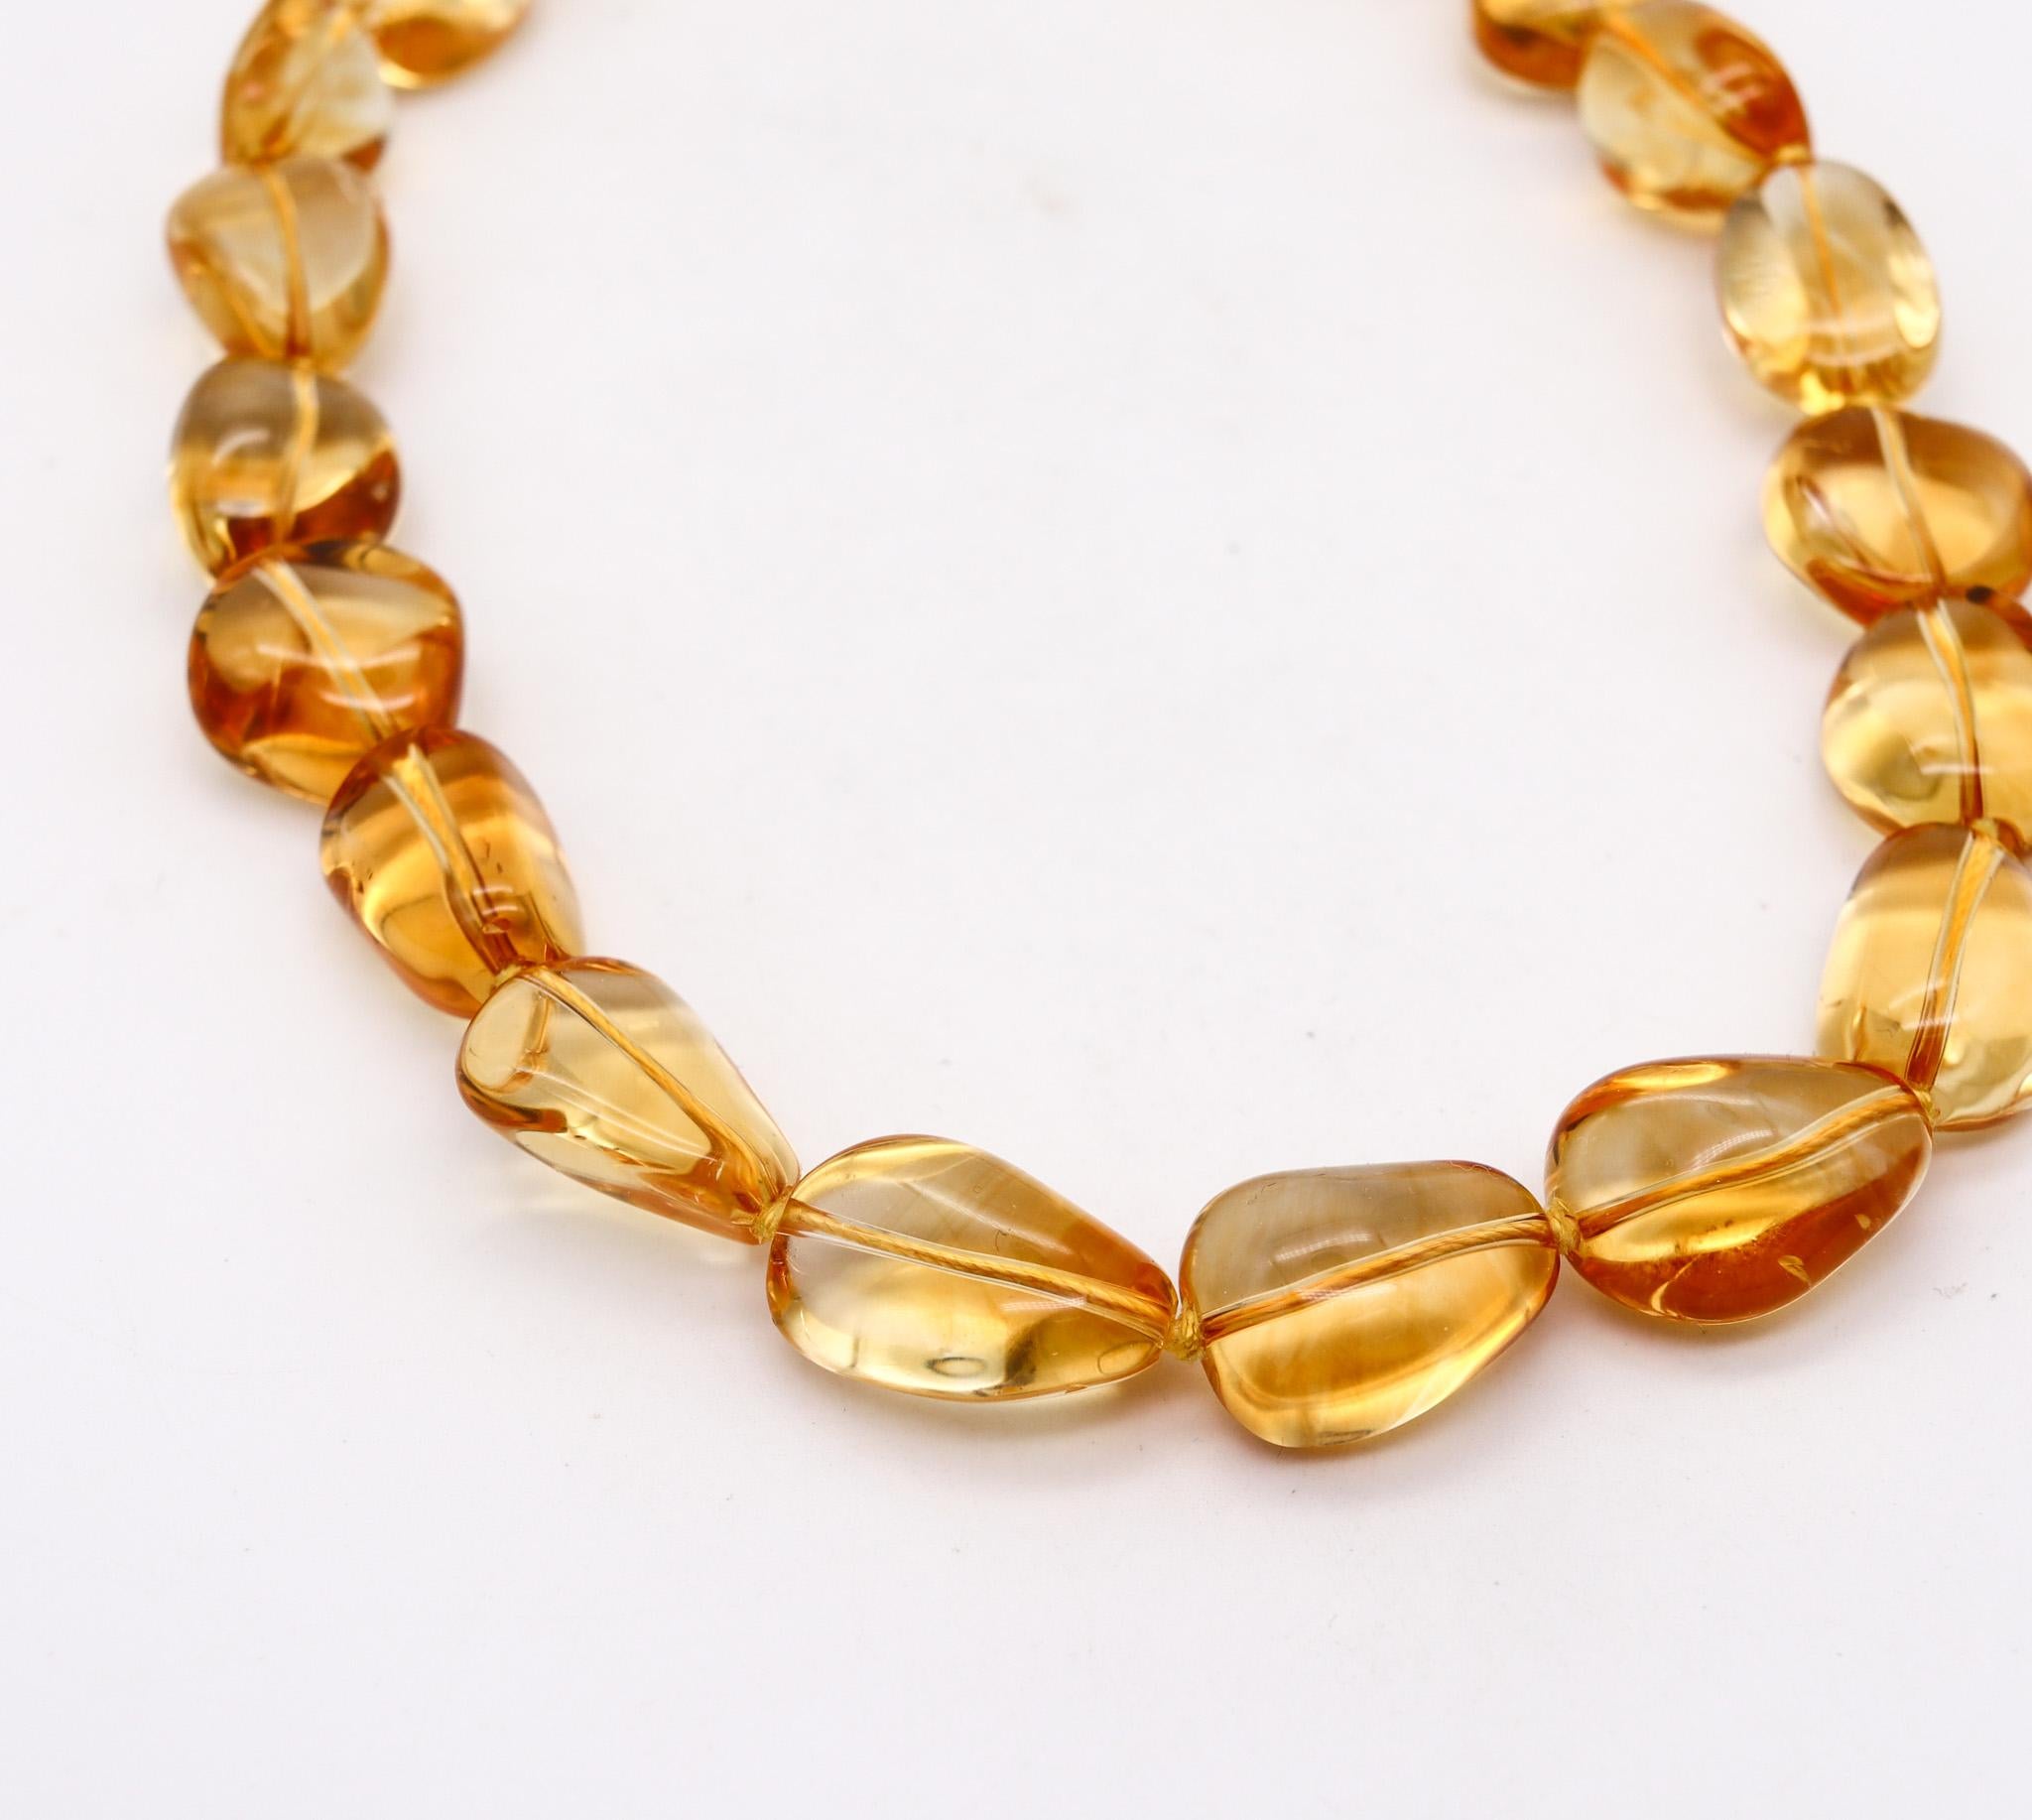 Necklace designed by Paloma Picasso for Tiffany & Co.

A vintage and rare collector's piece, created in New York city by Paloma Picasso for the Tiffany Studios back in the late 1980's. This gemstones necklace  has been crafted in solid yellow gold